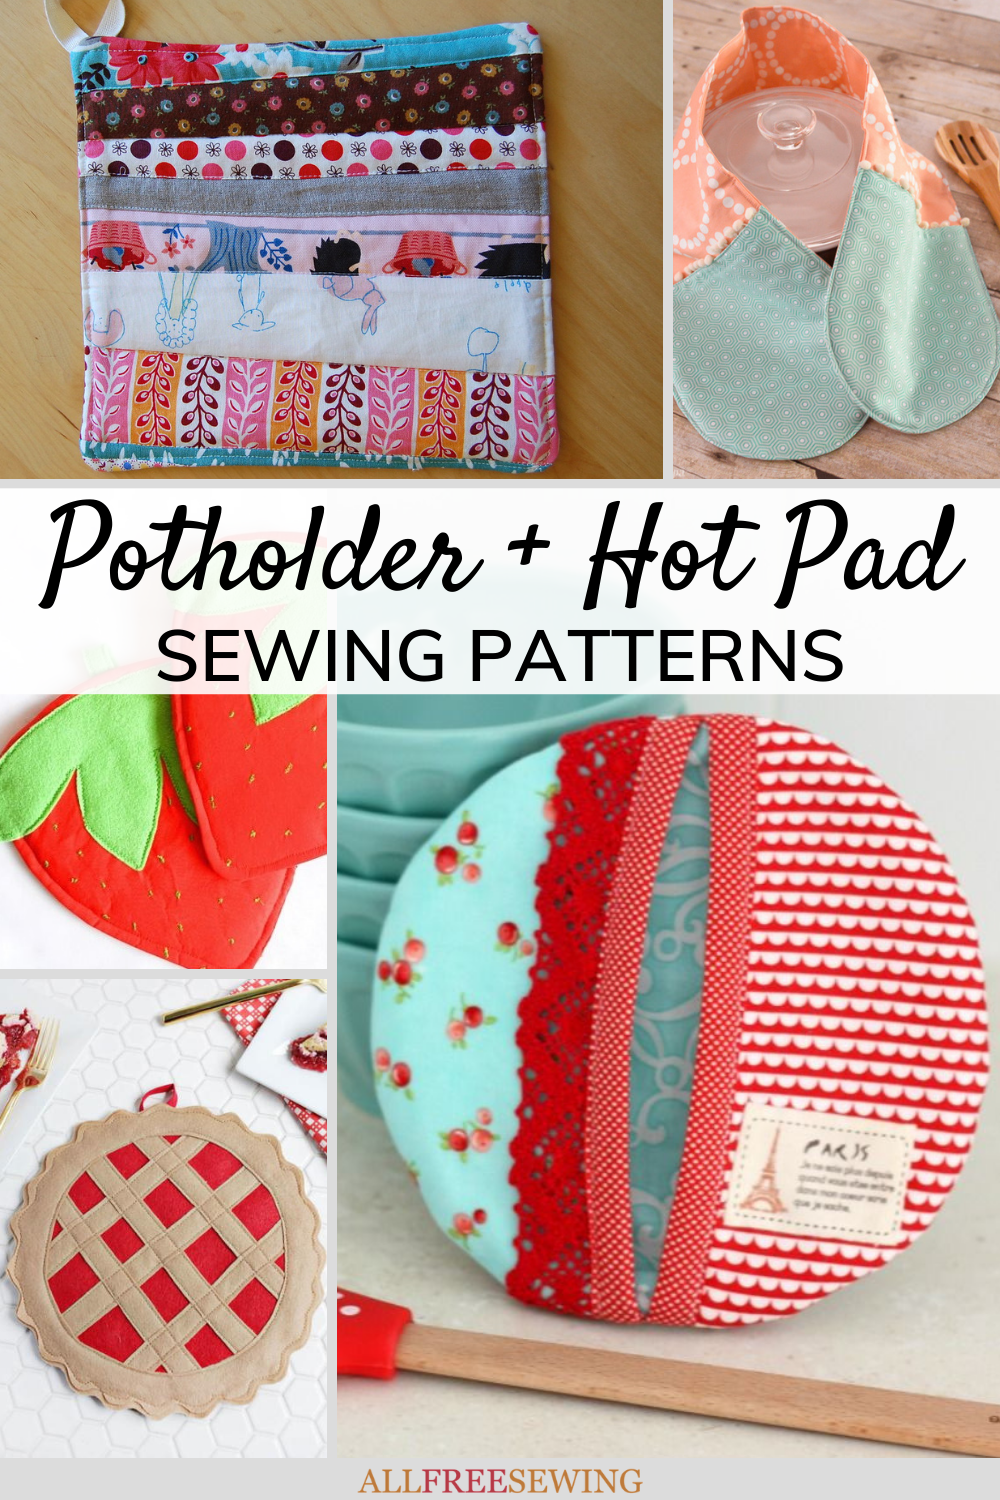 How to Make Potholders from Upcycled T-Shirts - Do It Yourself Skills